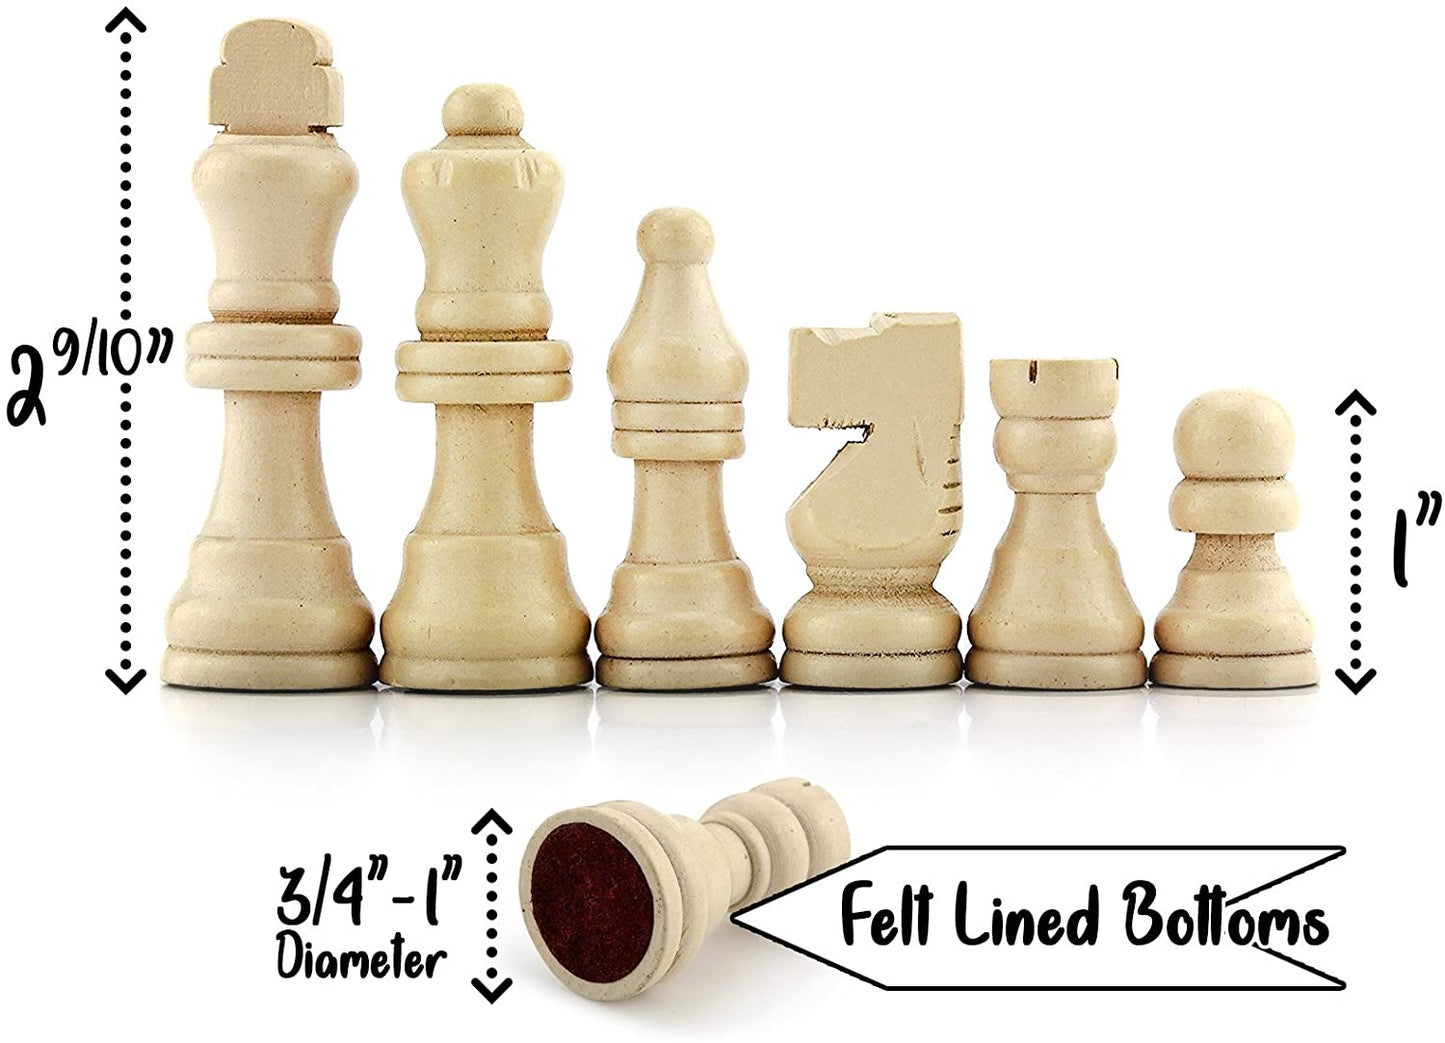 Complete Wooden Chess Pieces (32 Pieces)